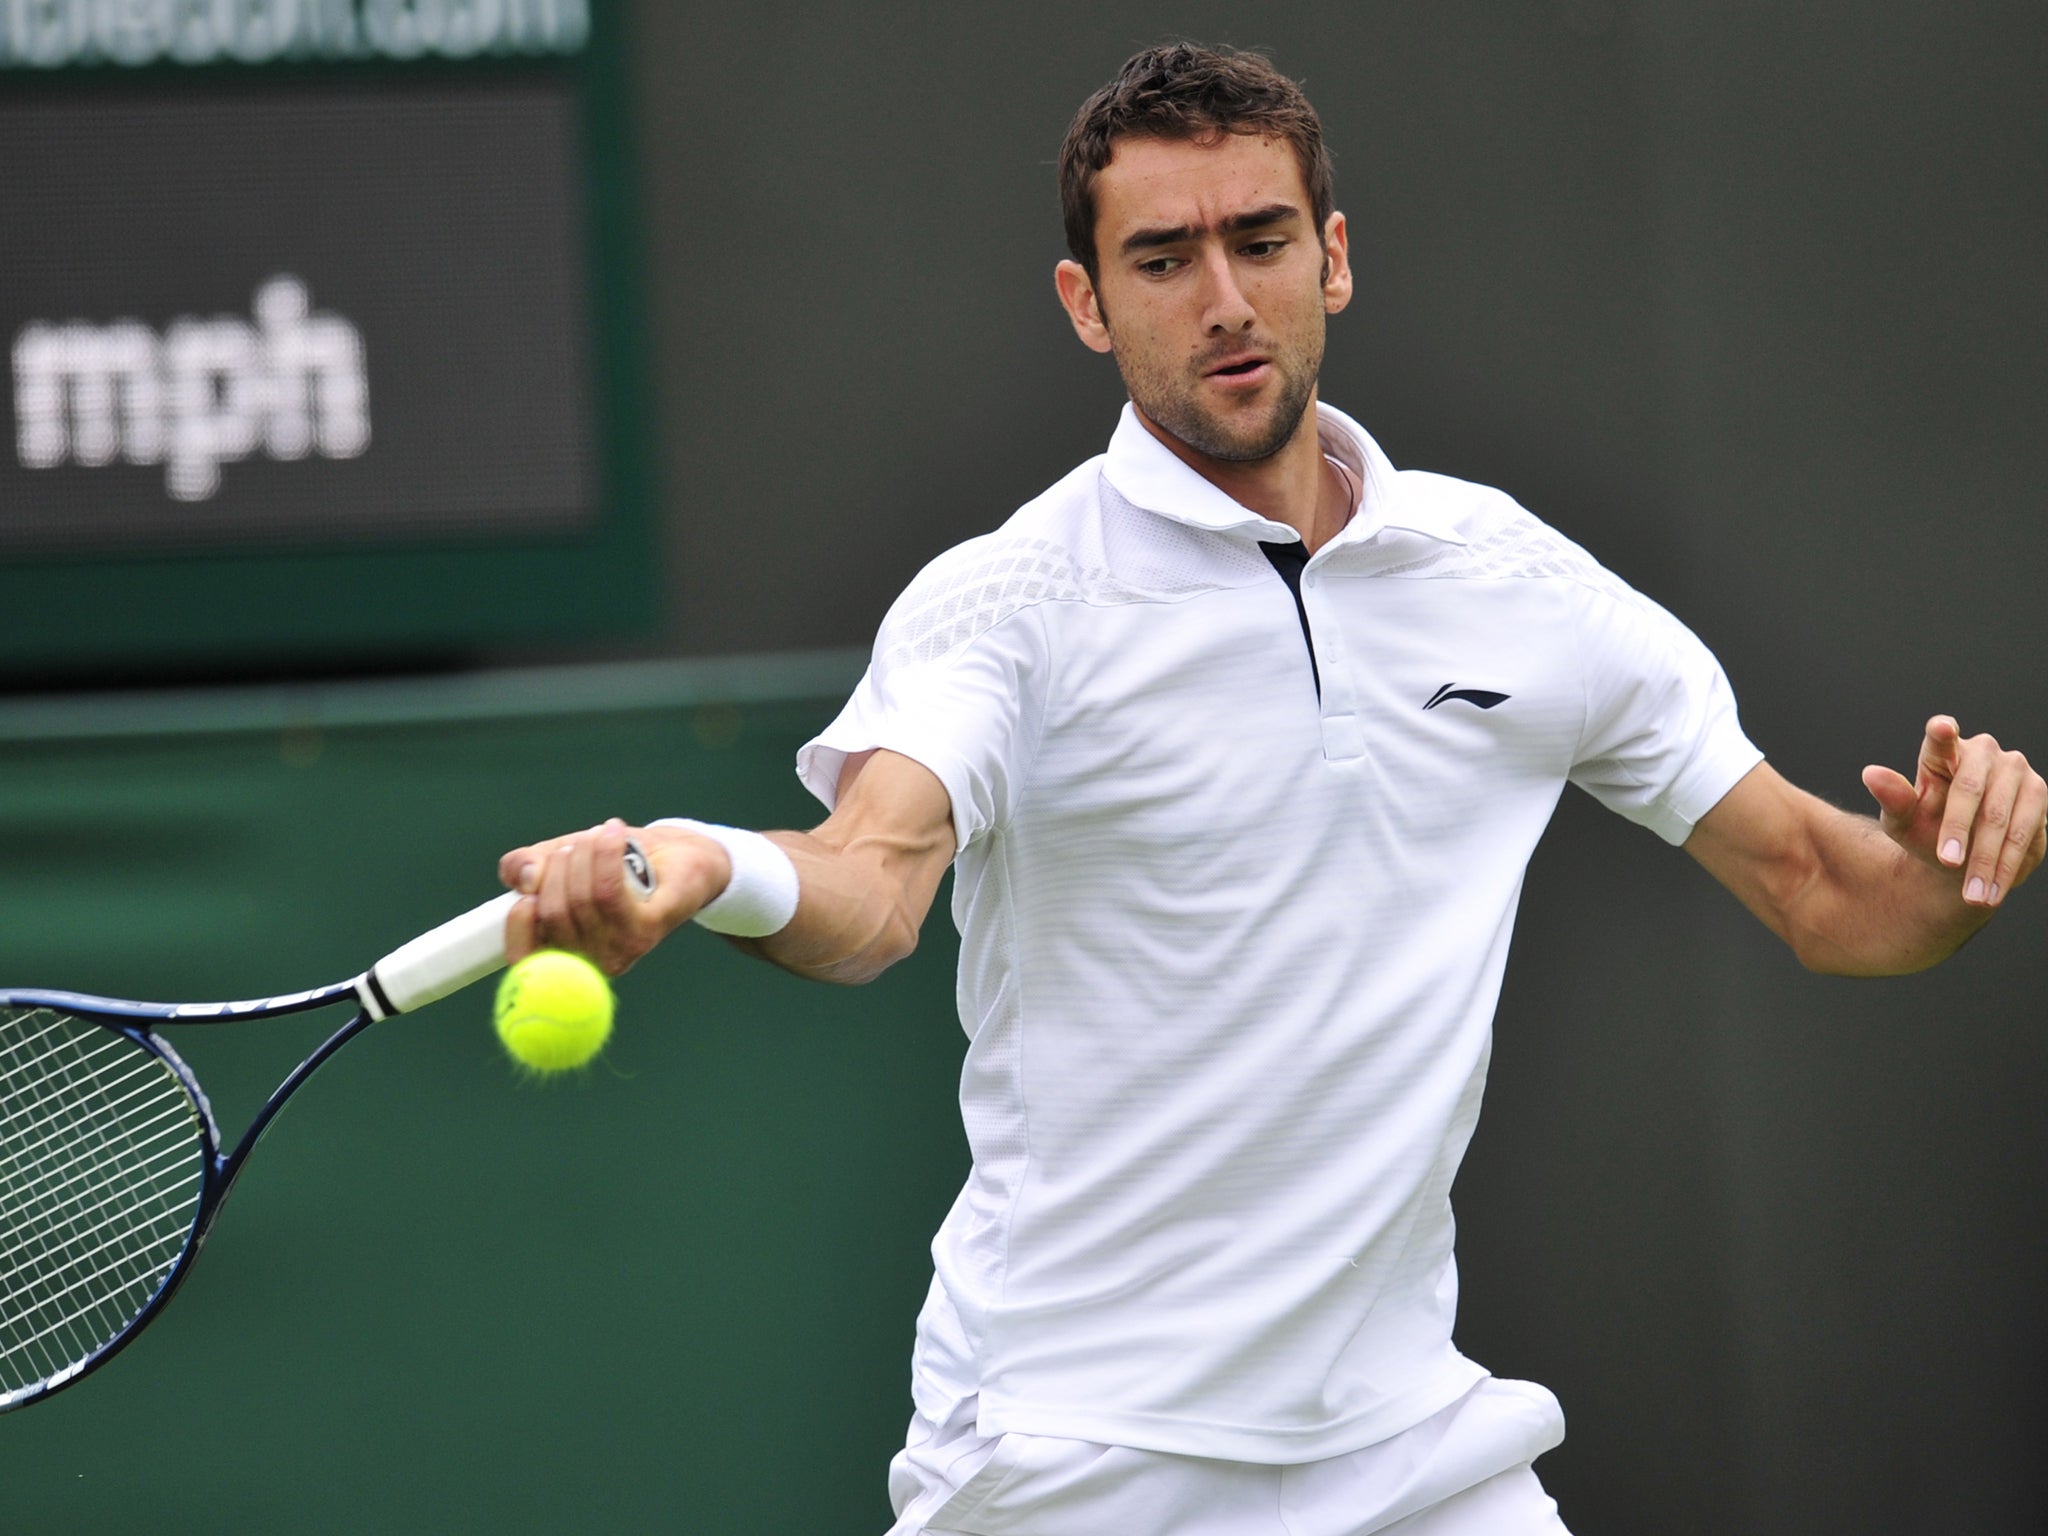 Marin Cilic is free to return to tennis after having his doping suspension reduced from nine months to four